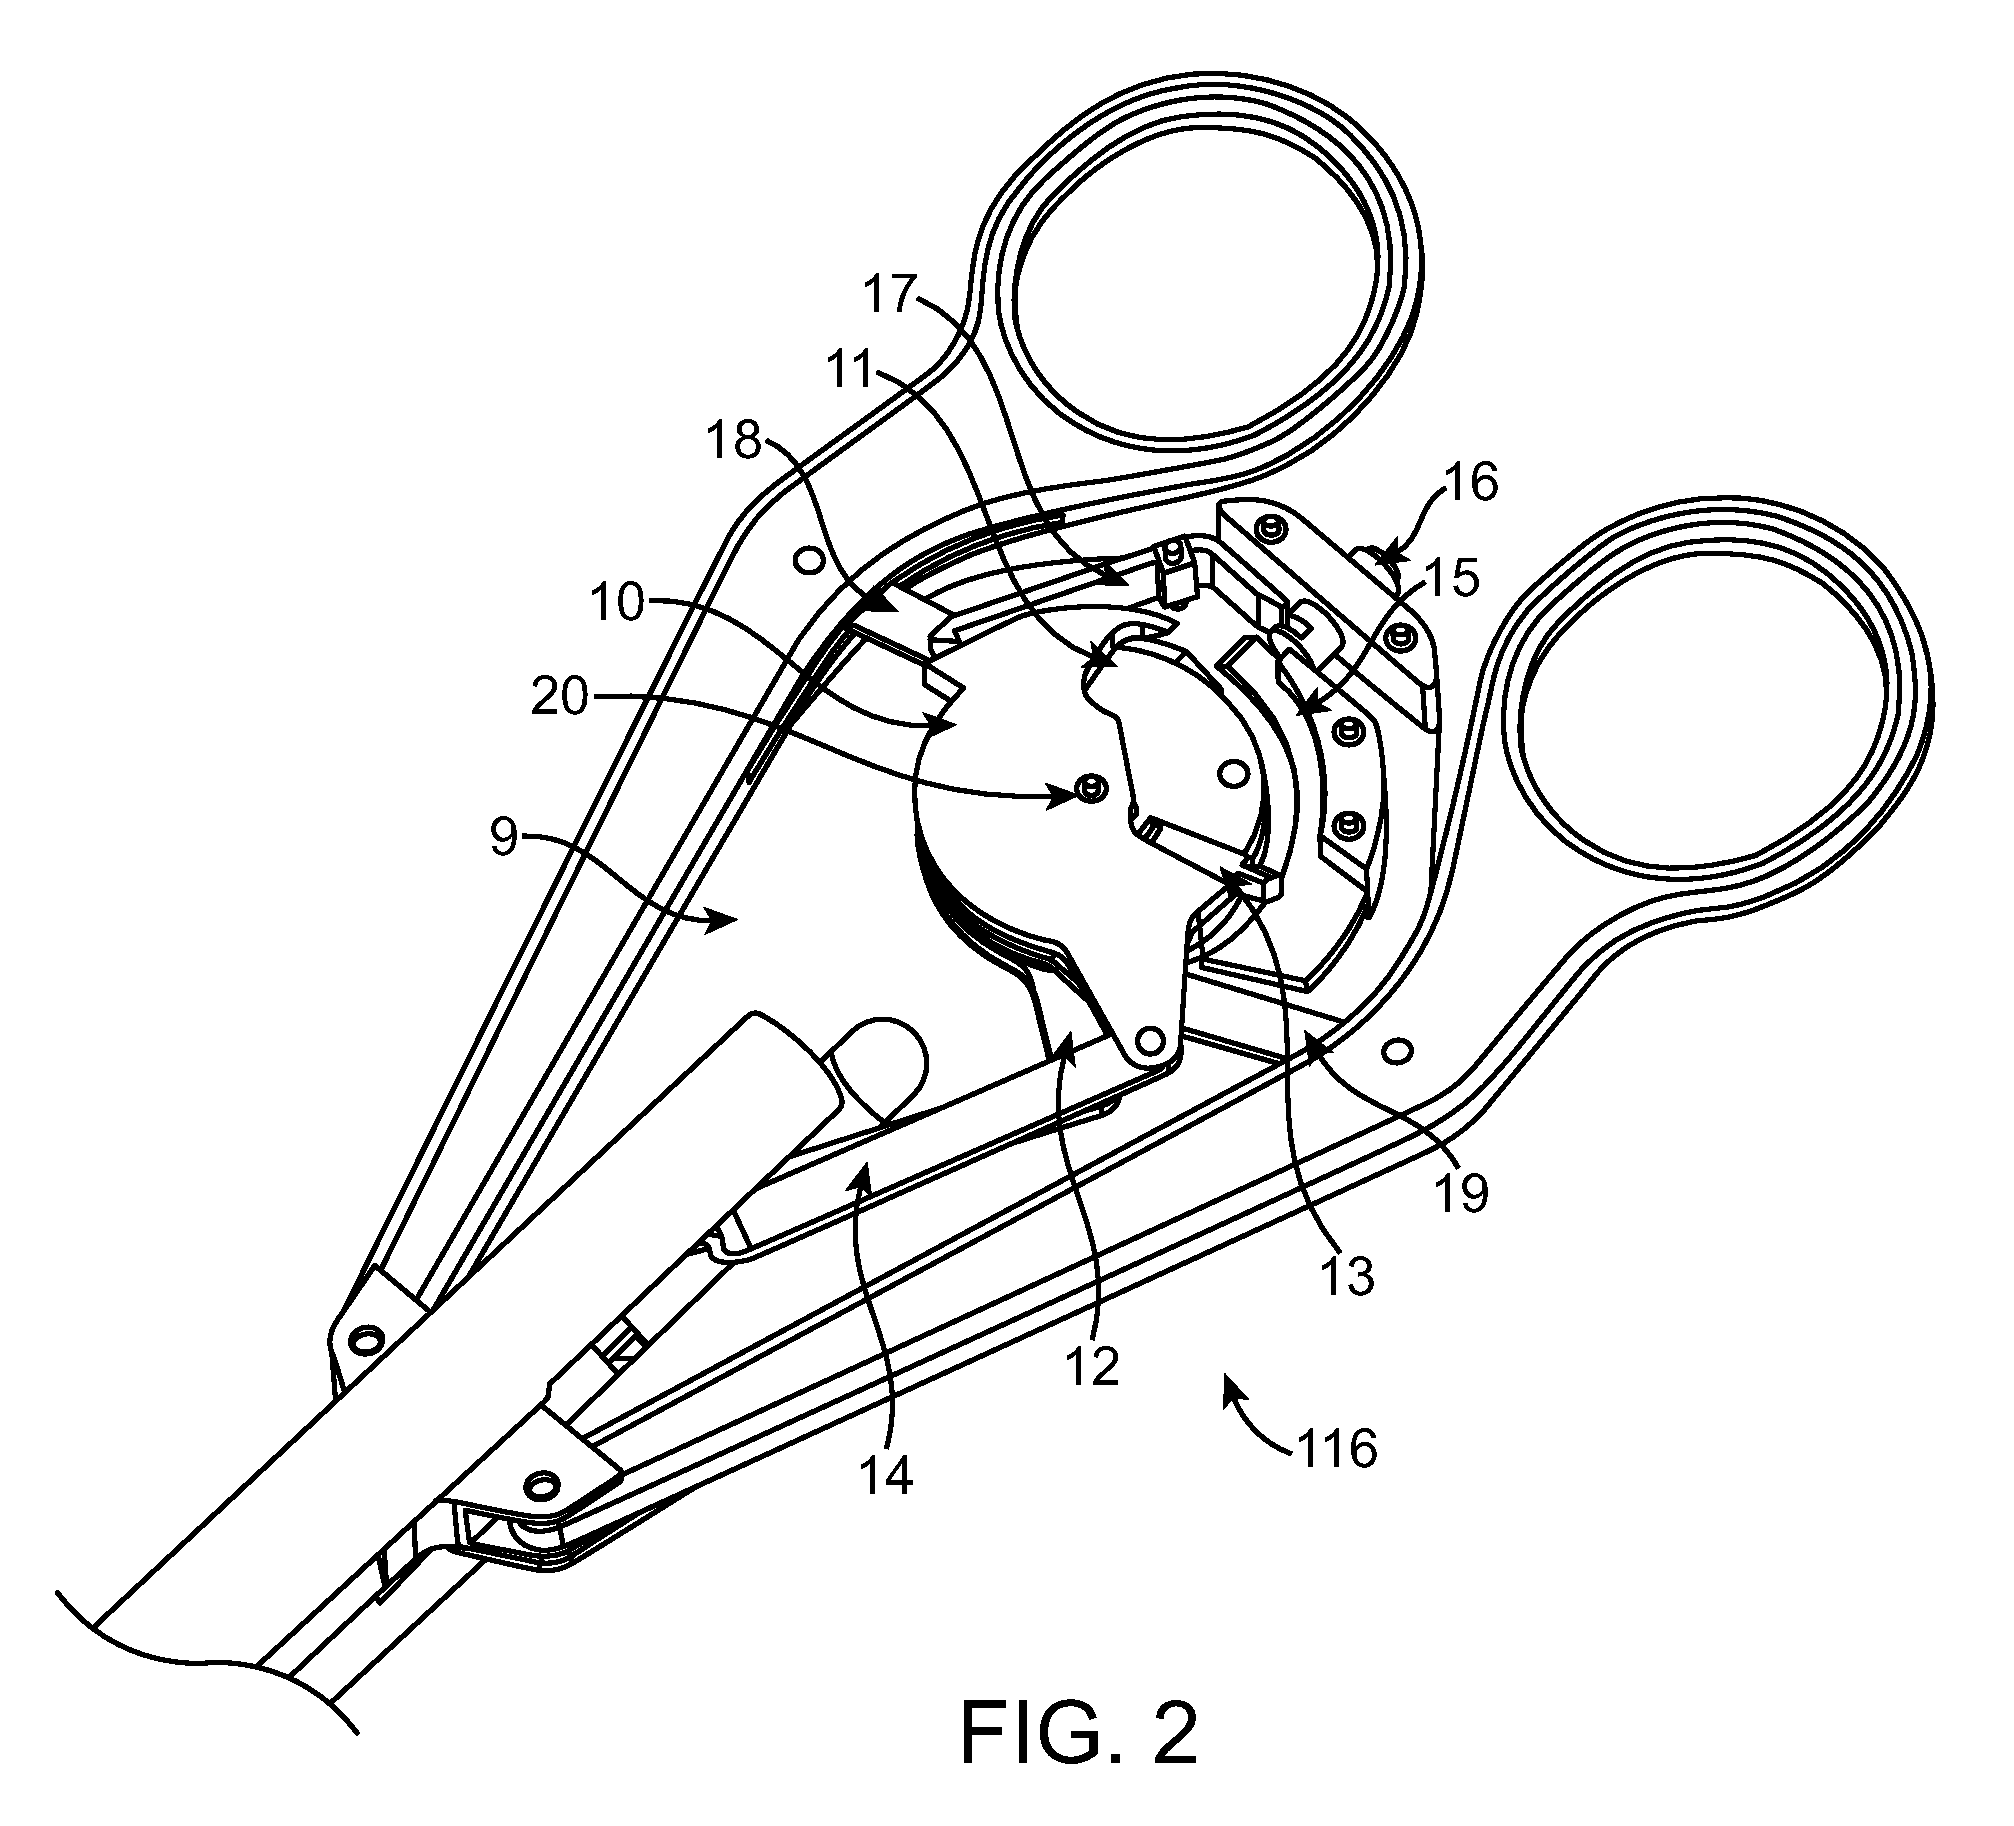 Limited Access Suturing Devices, System, and Methods